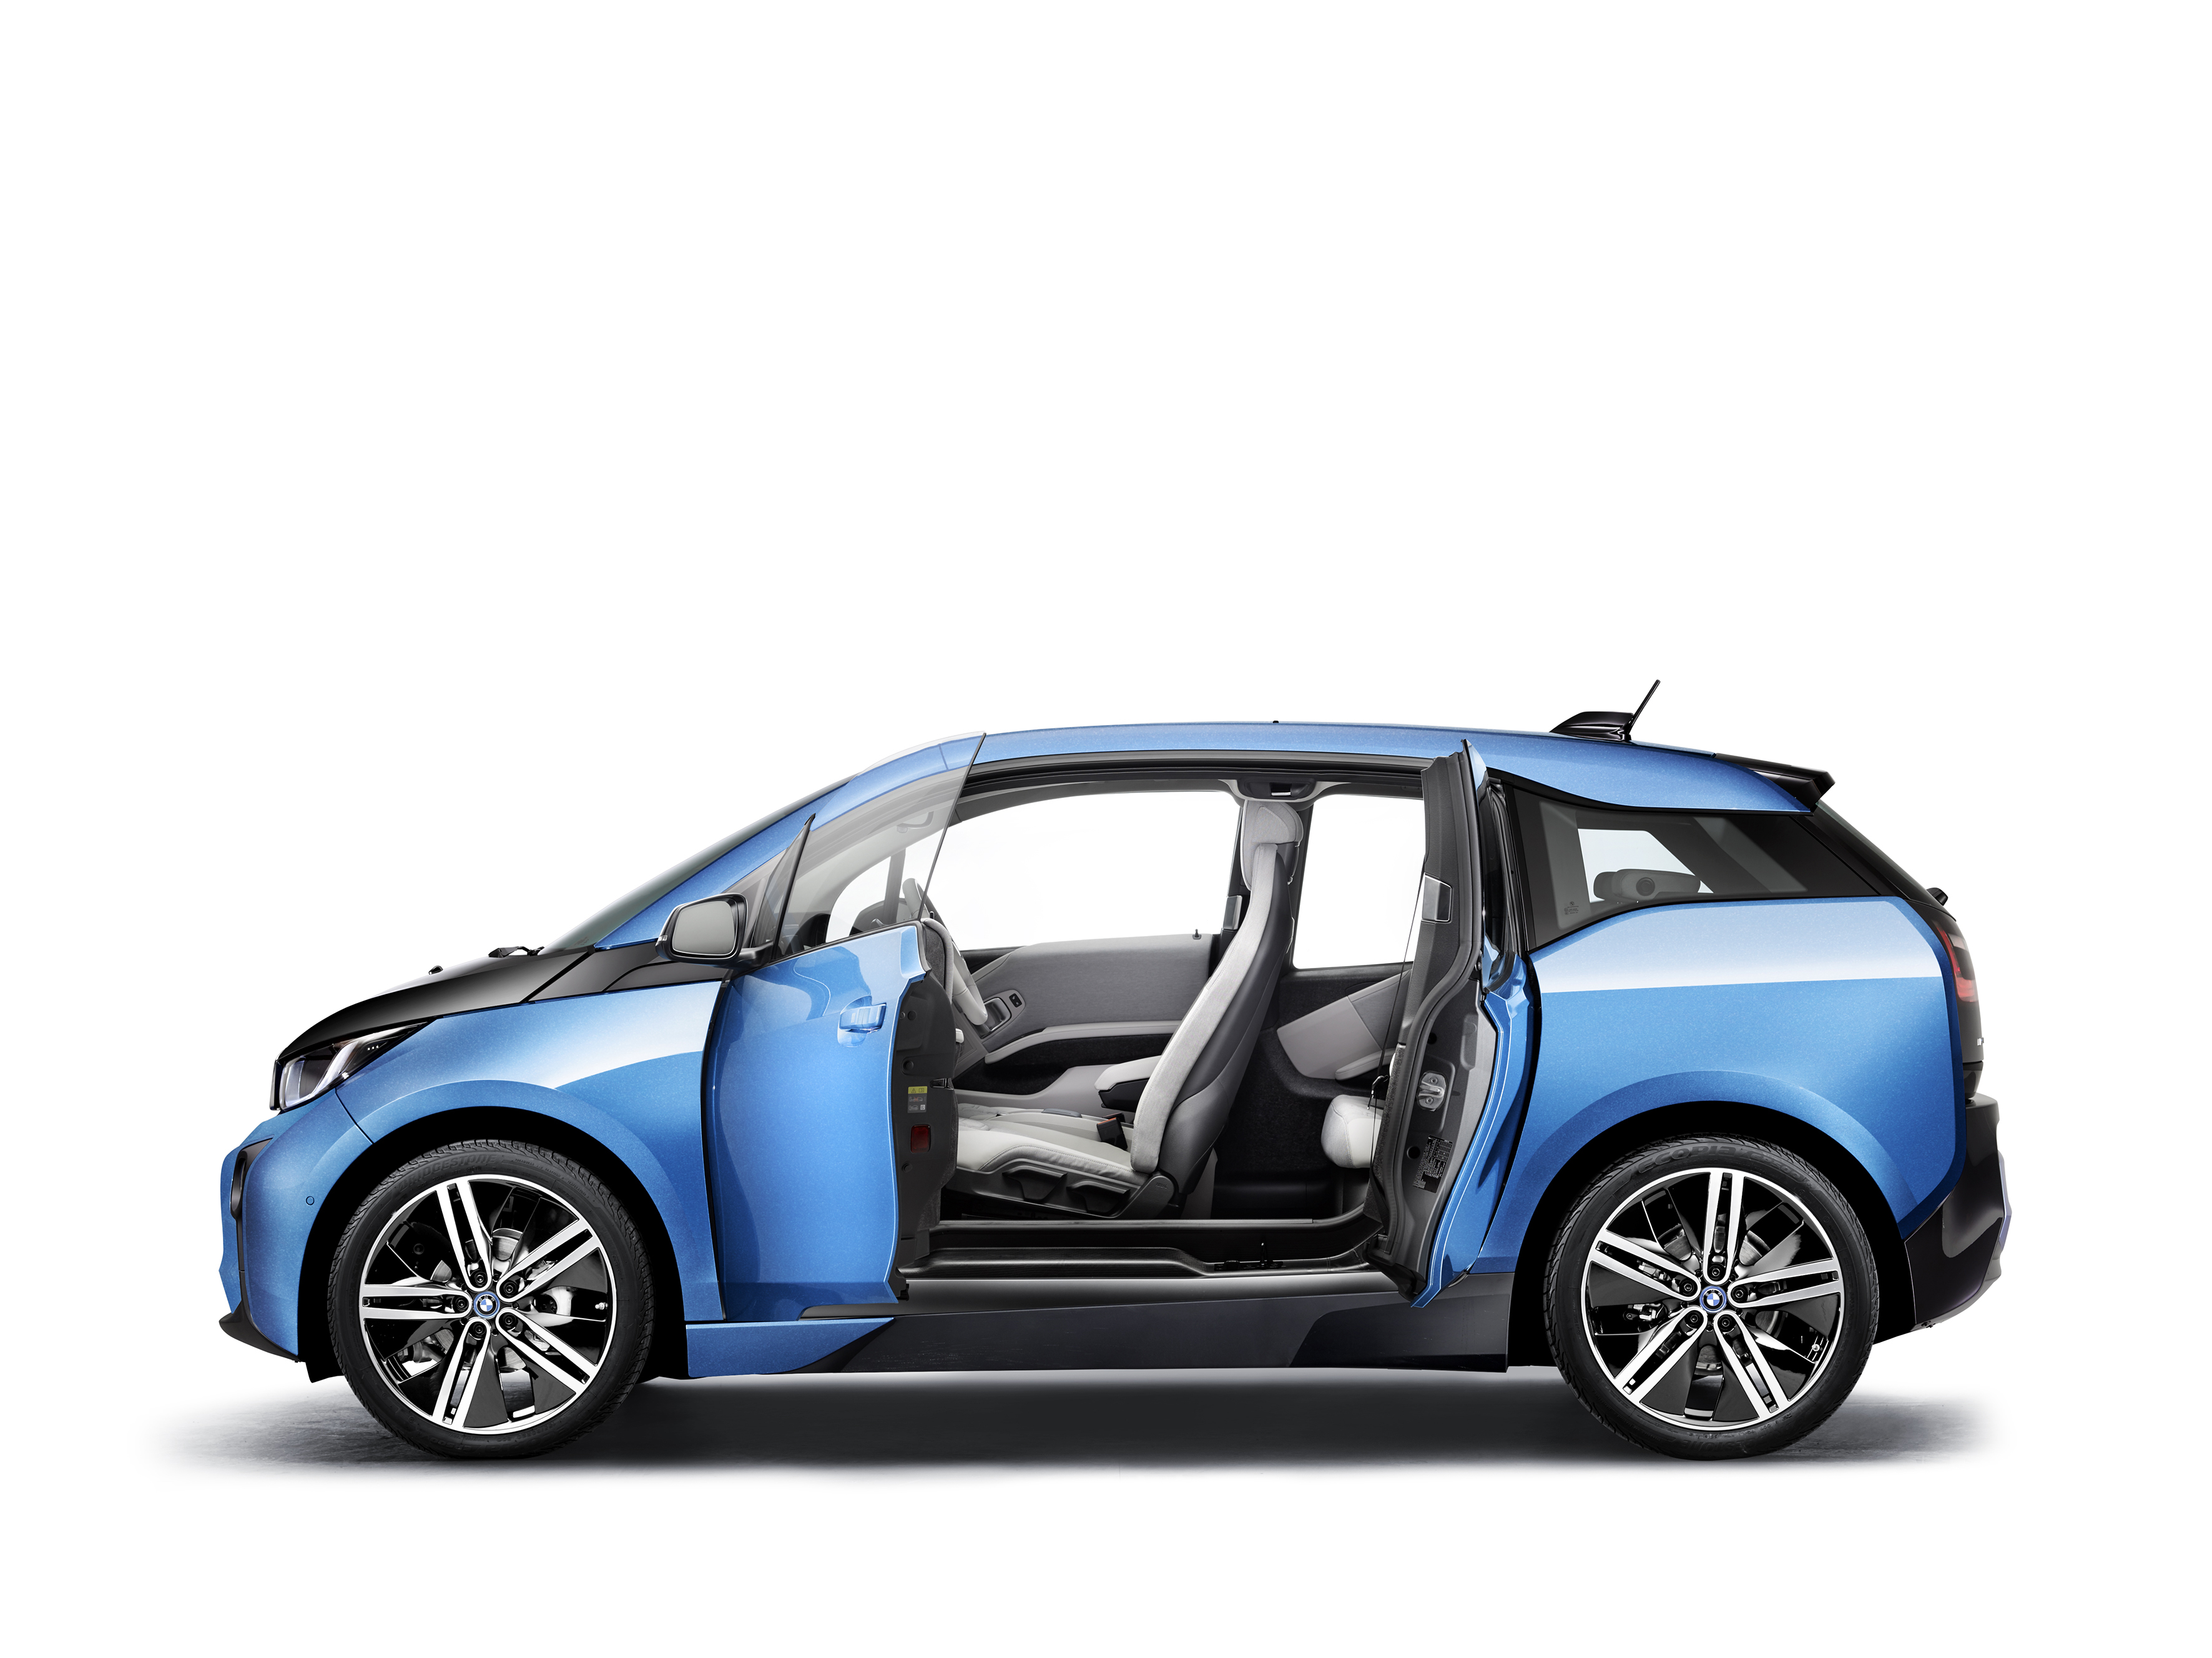 BMW I3 Backgrounds, Compatible - PC, Mobile, Gadgets| 3543x2655 px